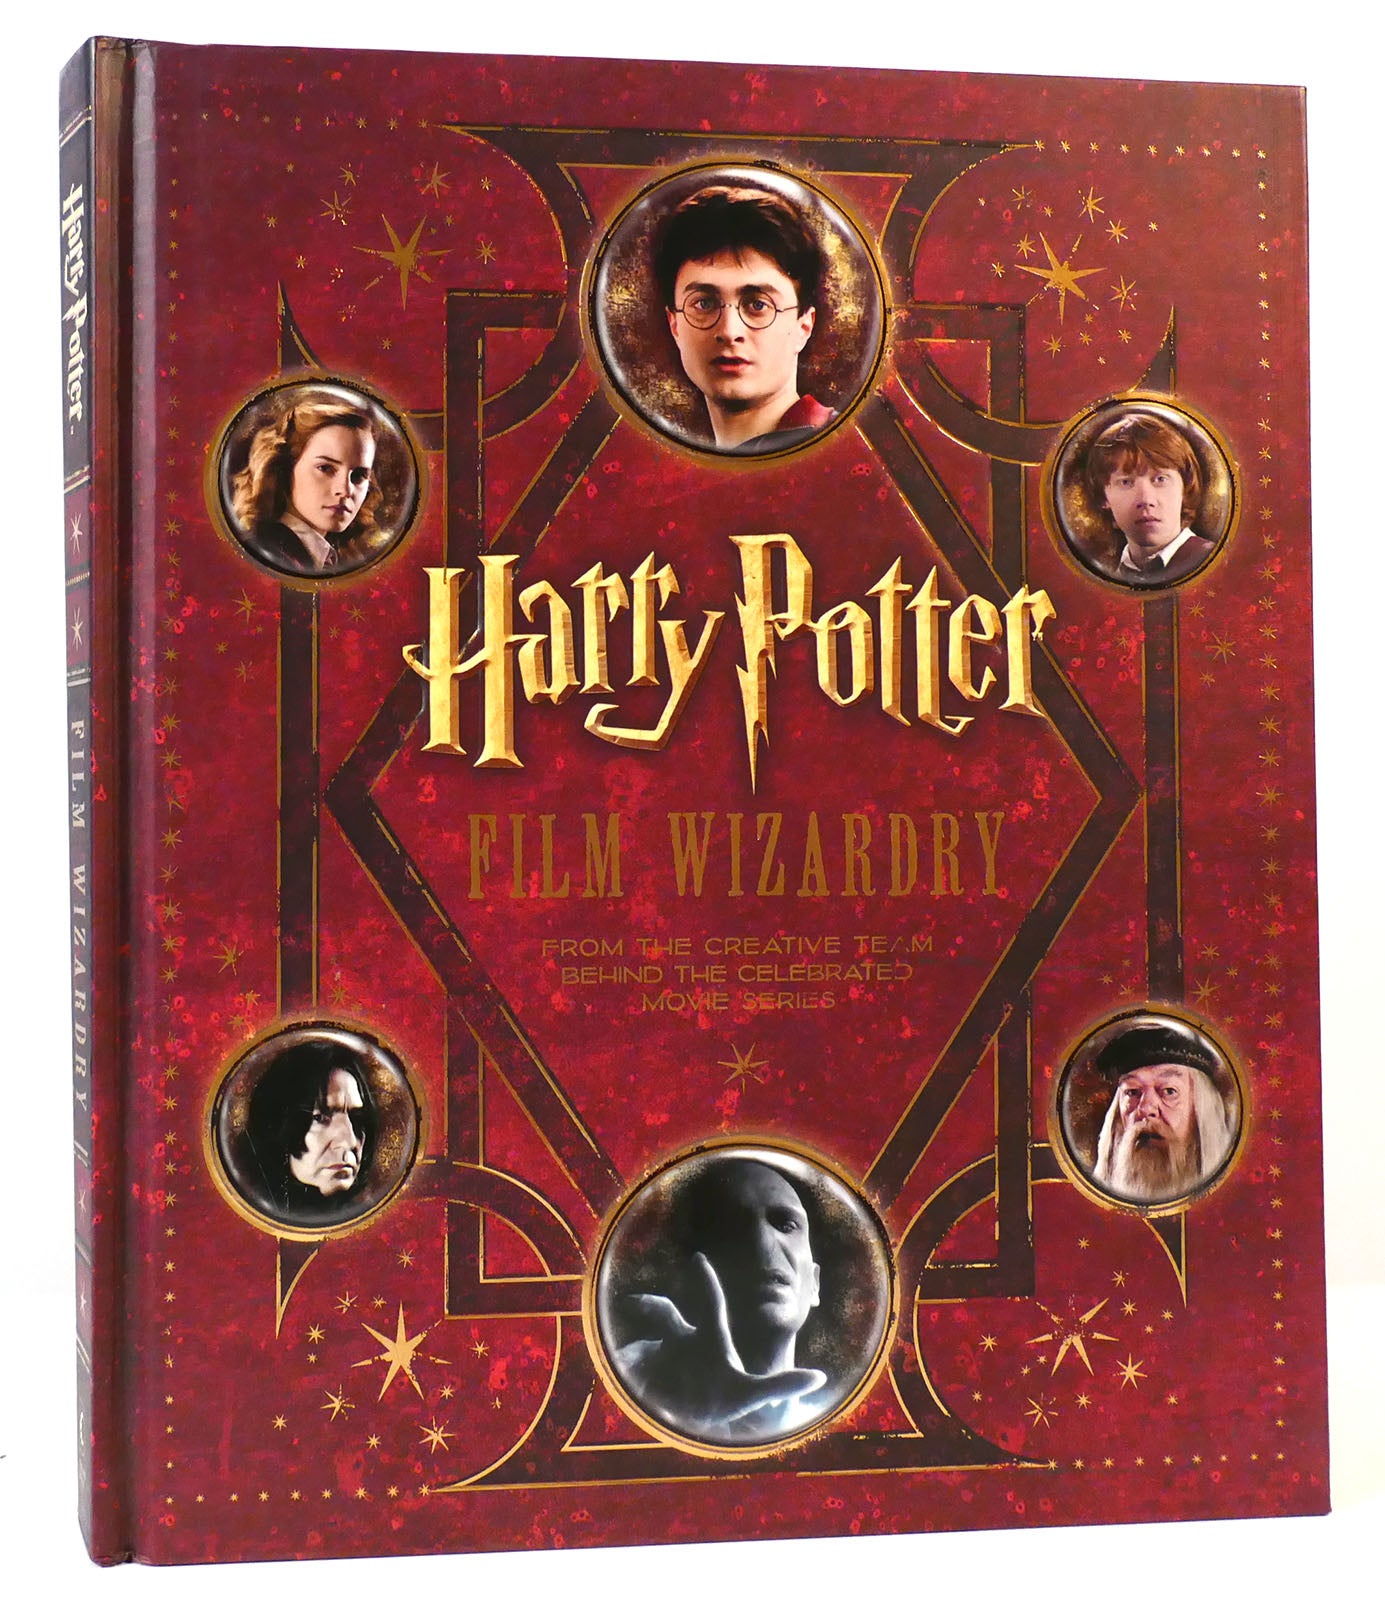 HARRY POTTER FILM WIZARDRY From the Creative Team Behind the